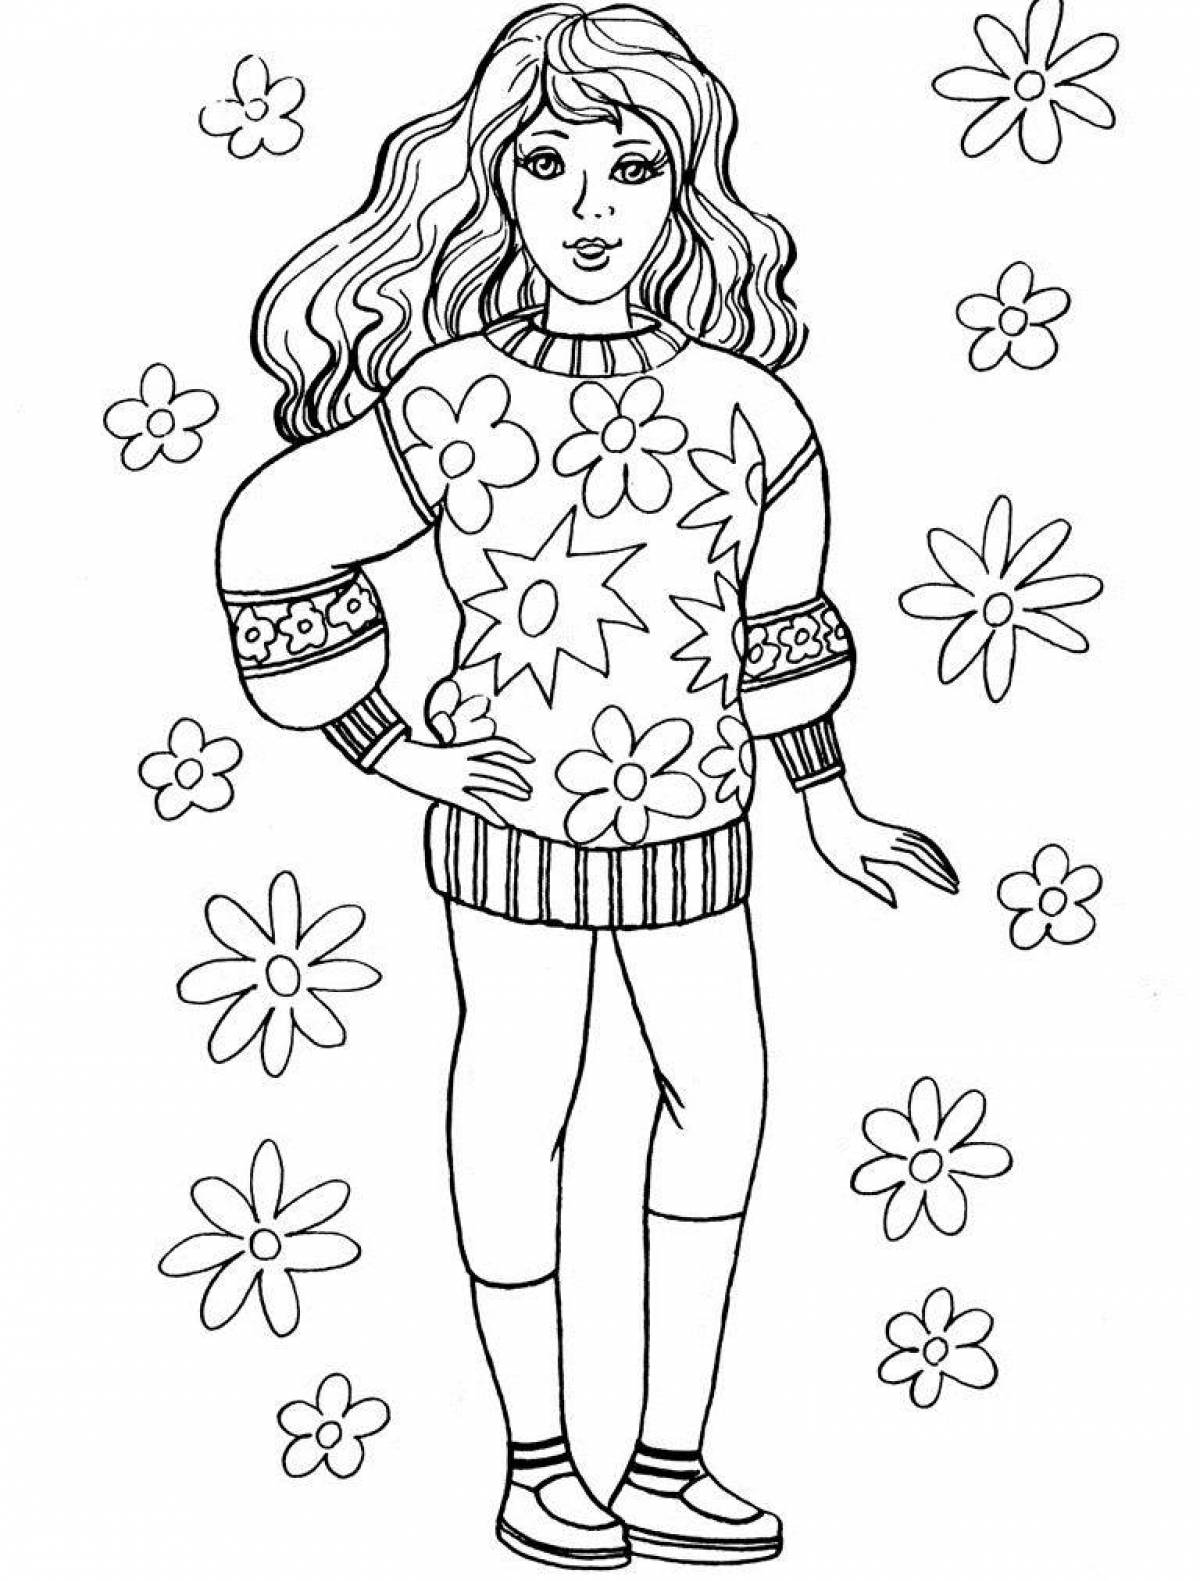 Coloring pages for girls 14